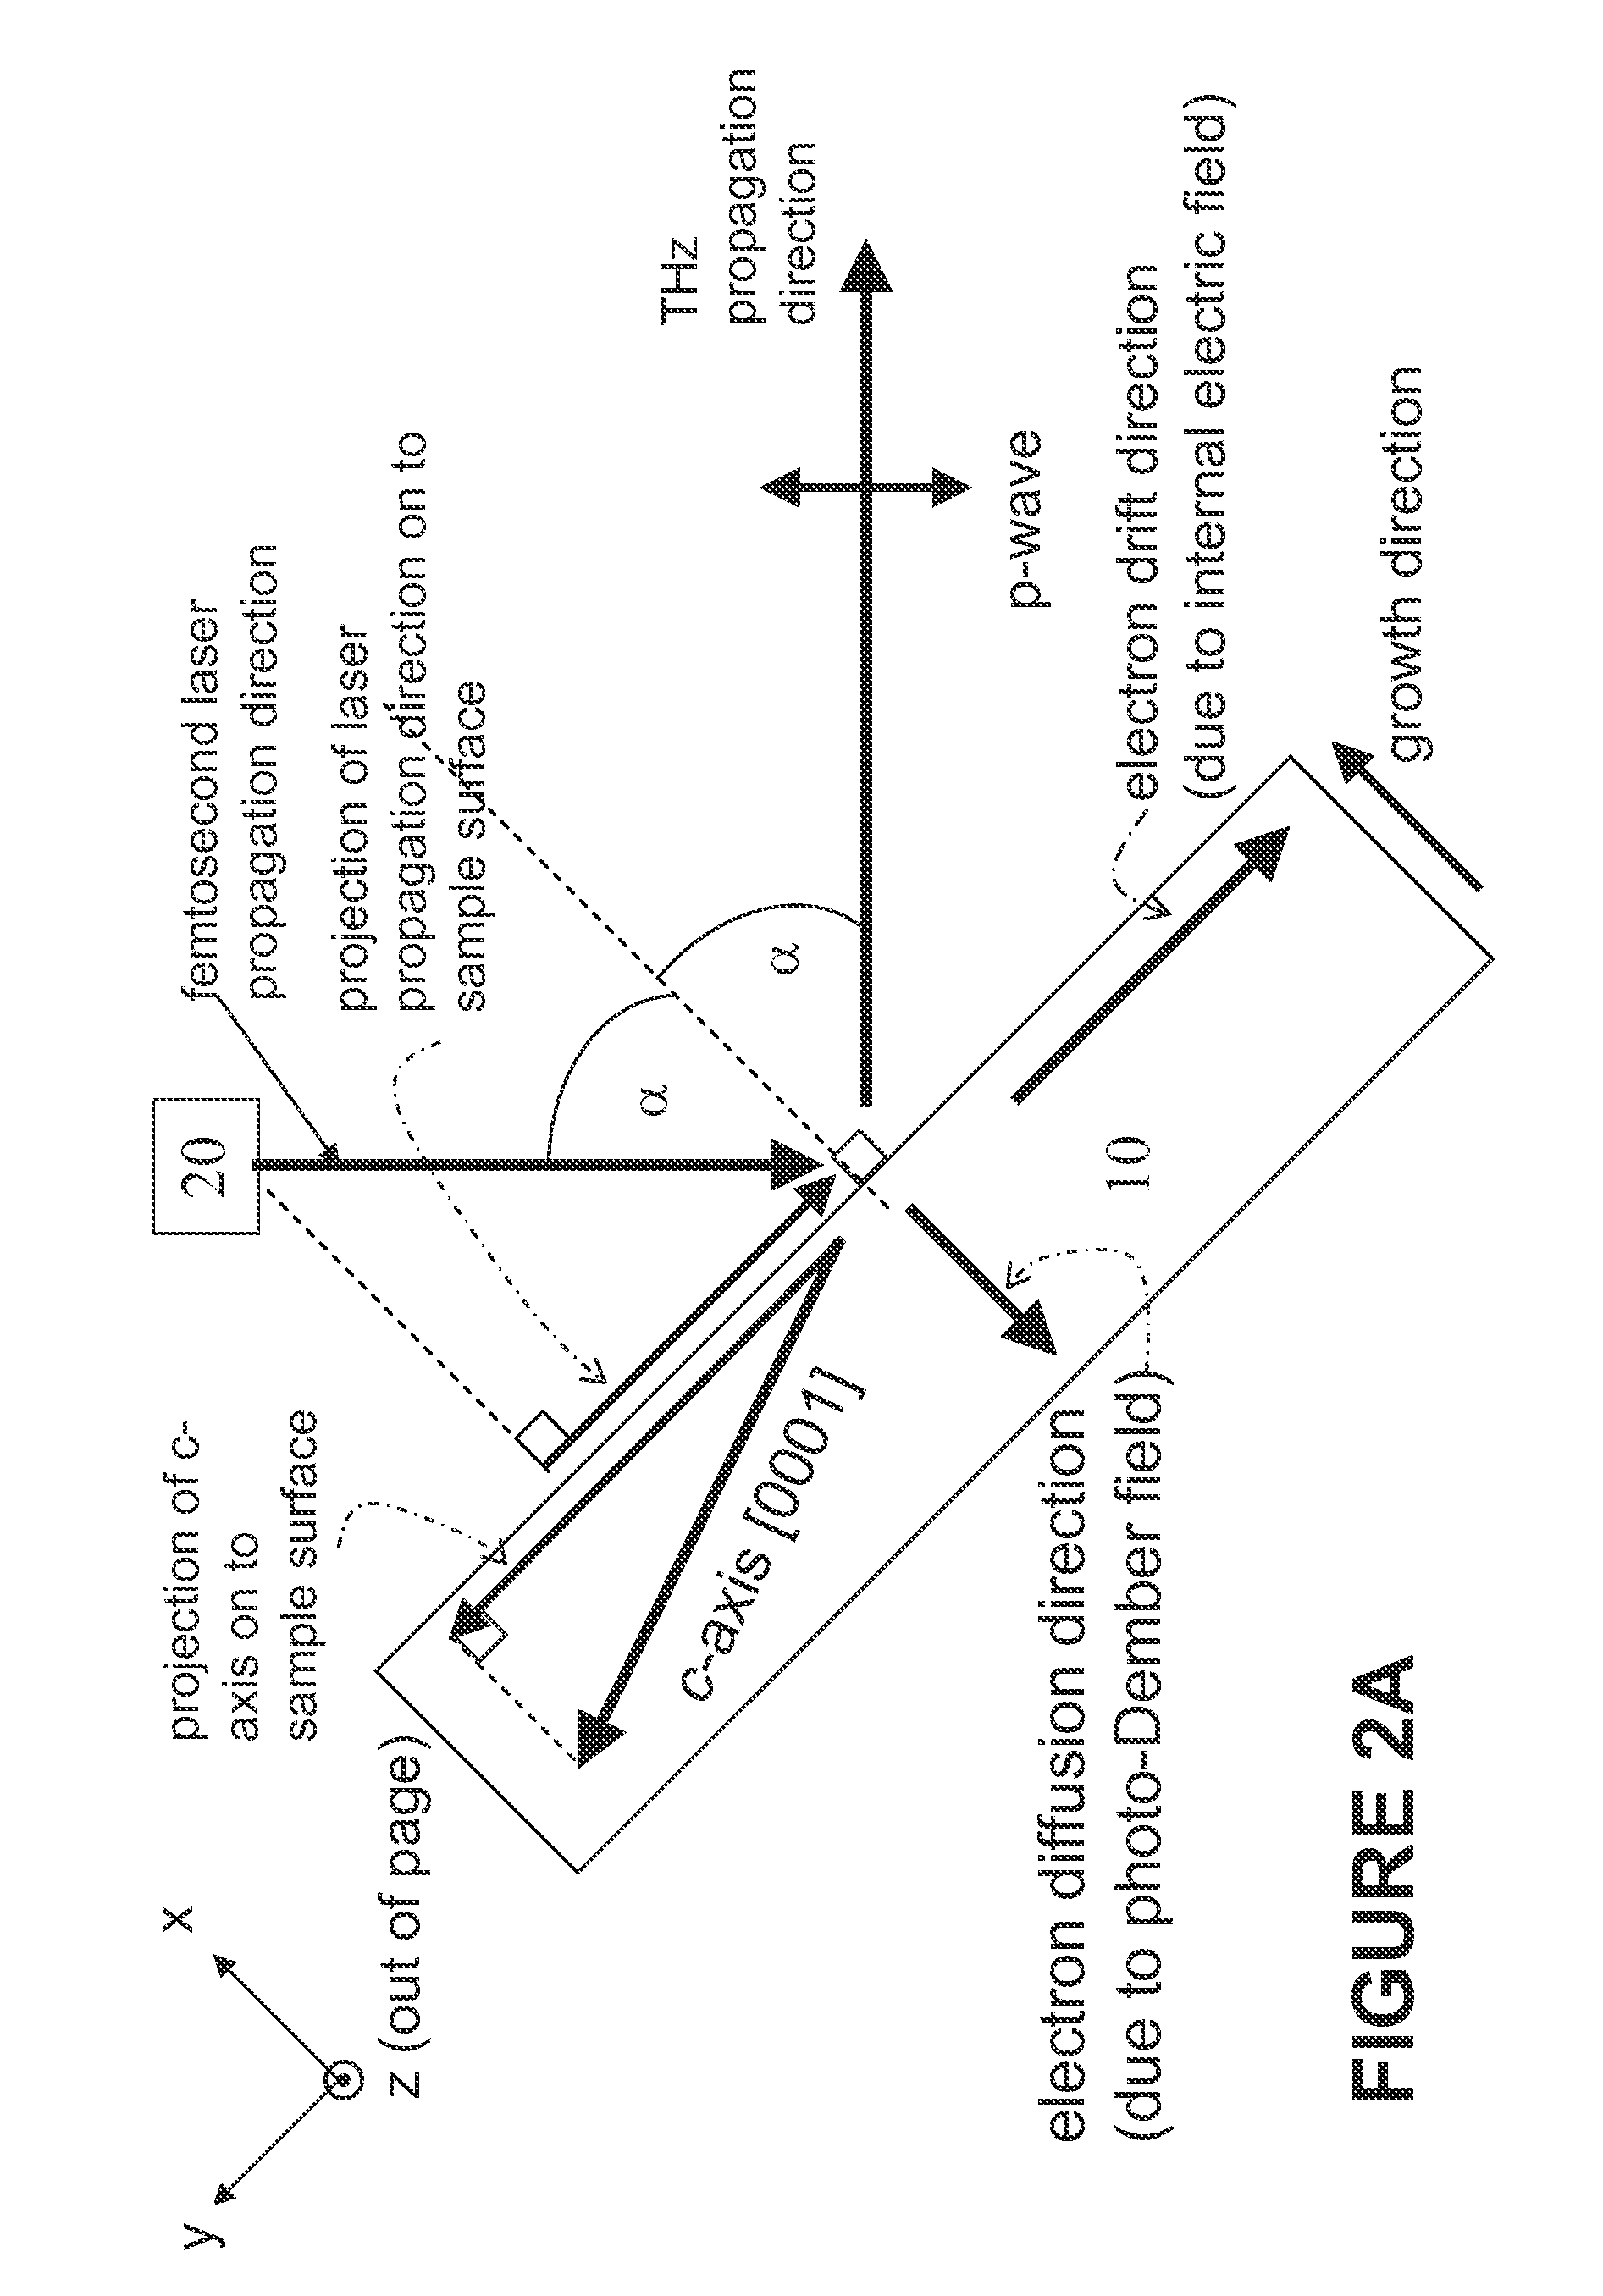 Method and Apparatus for Enhanced Terahertz Radiation from High Stacking Fault Density